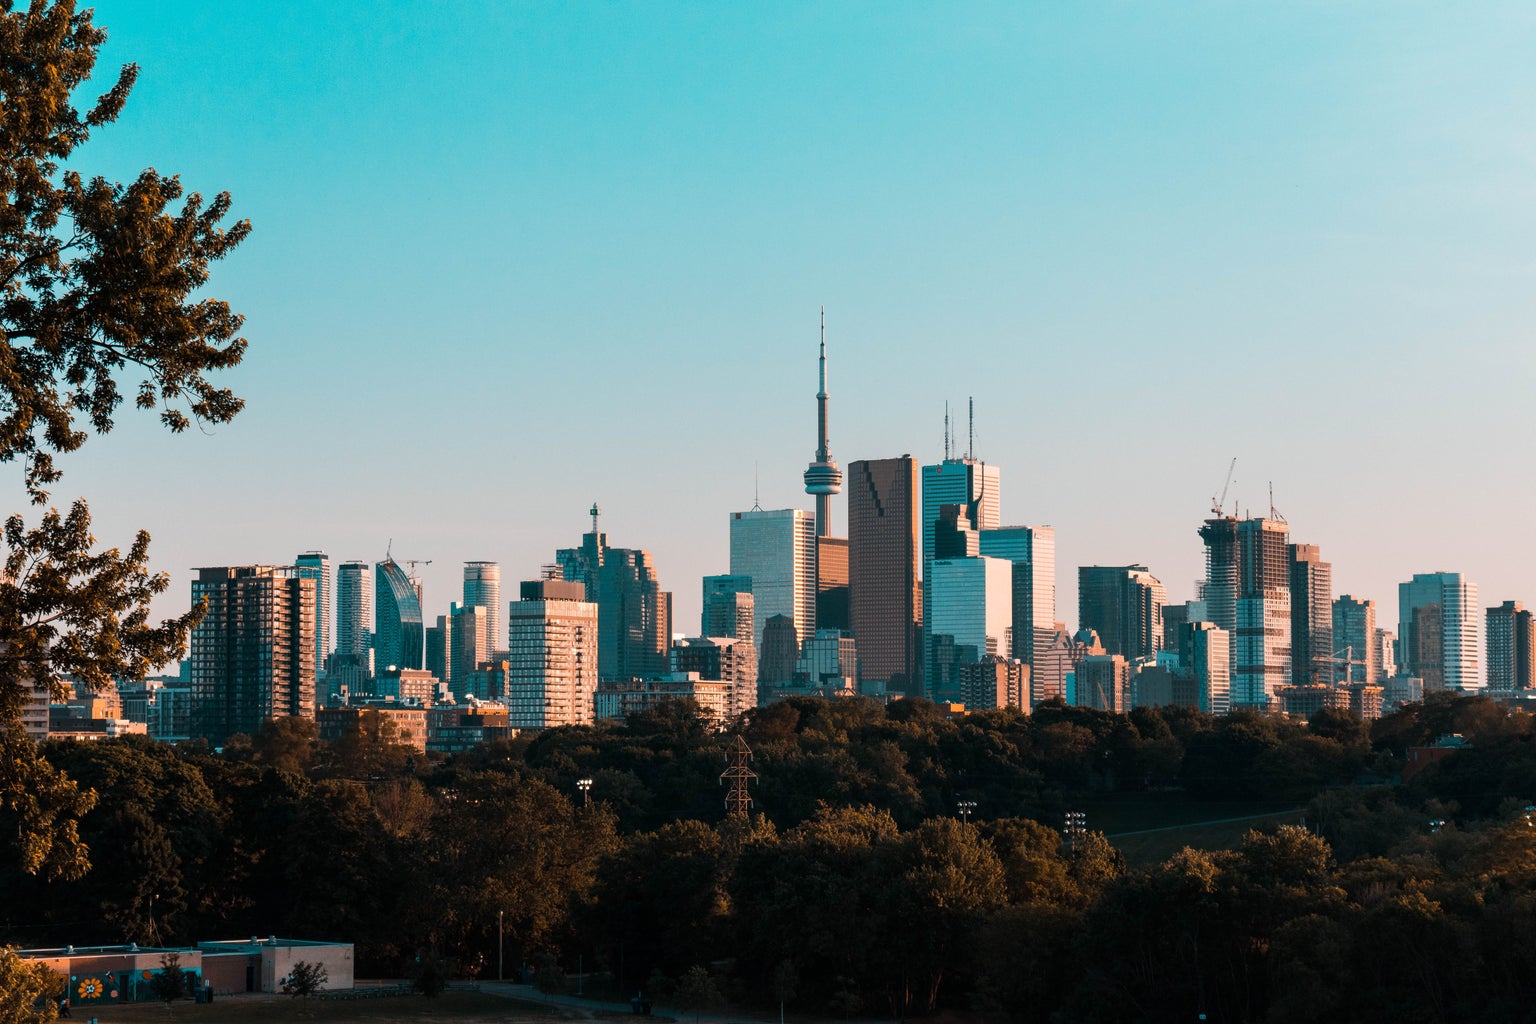 The Toronto skyline during the day